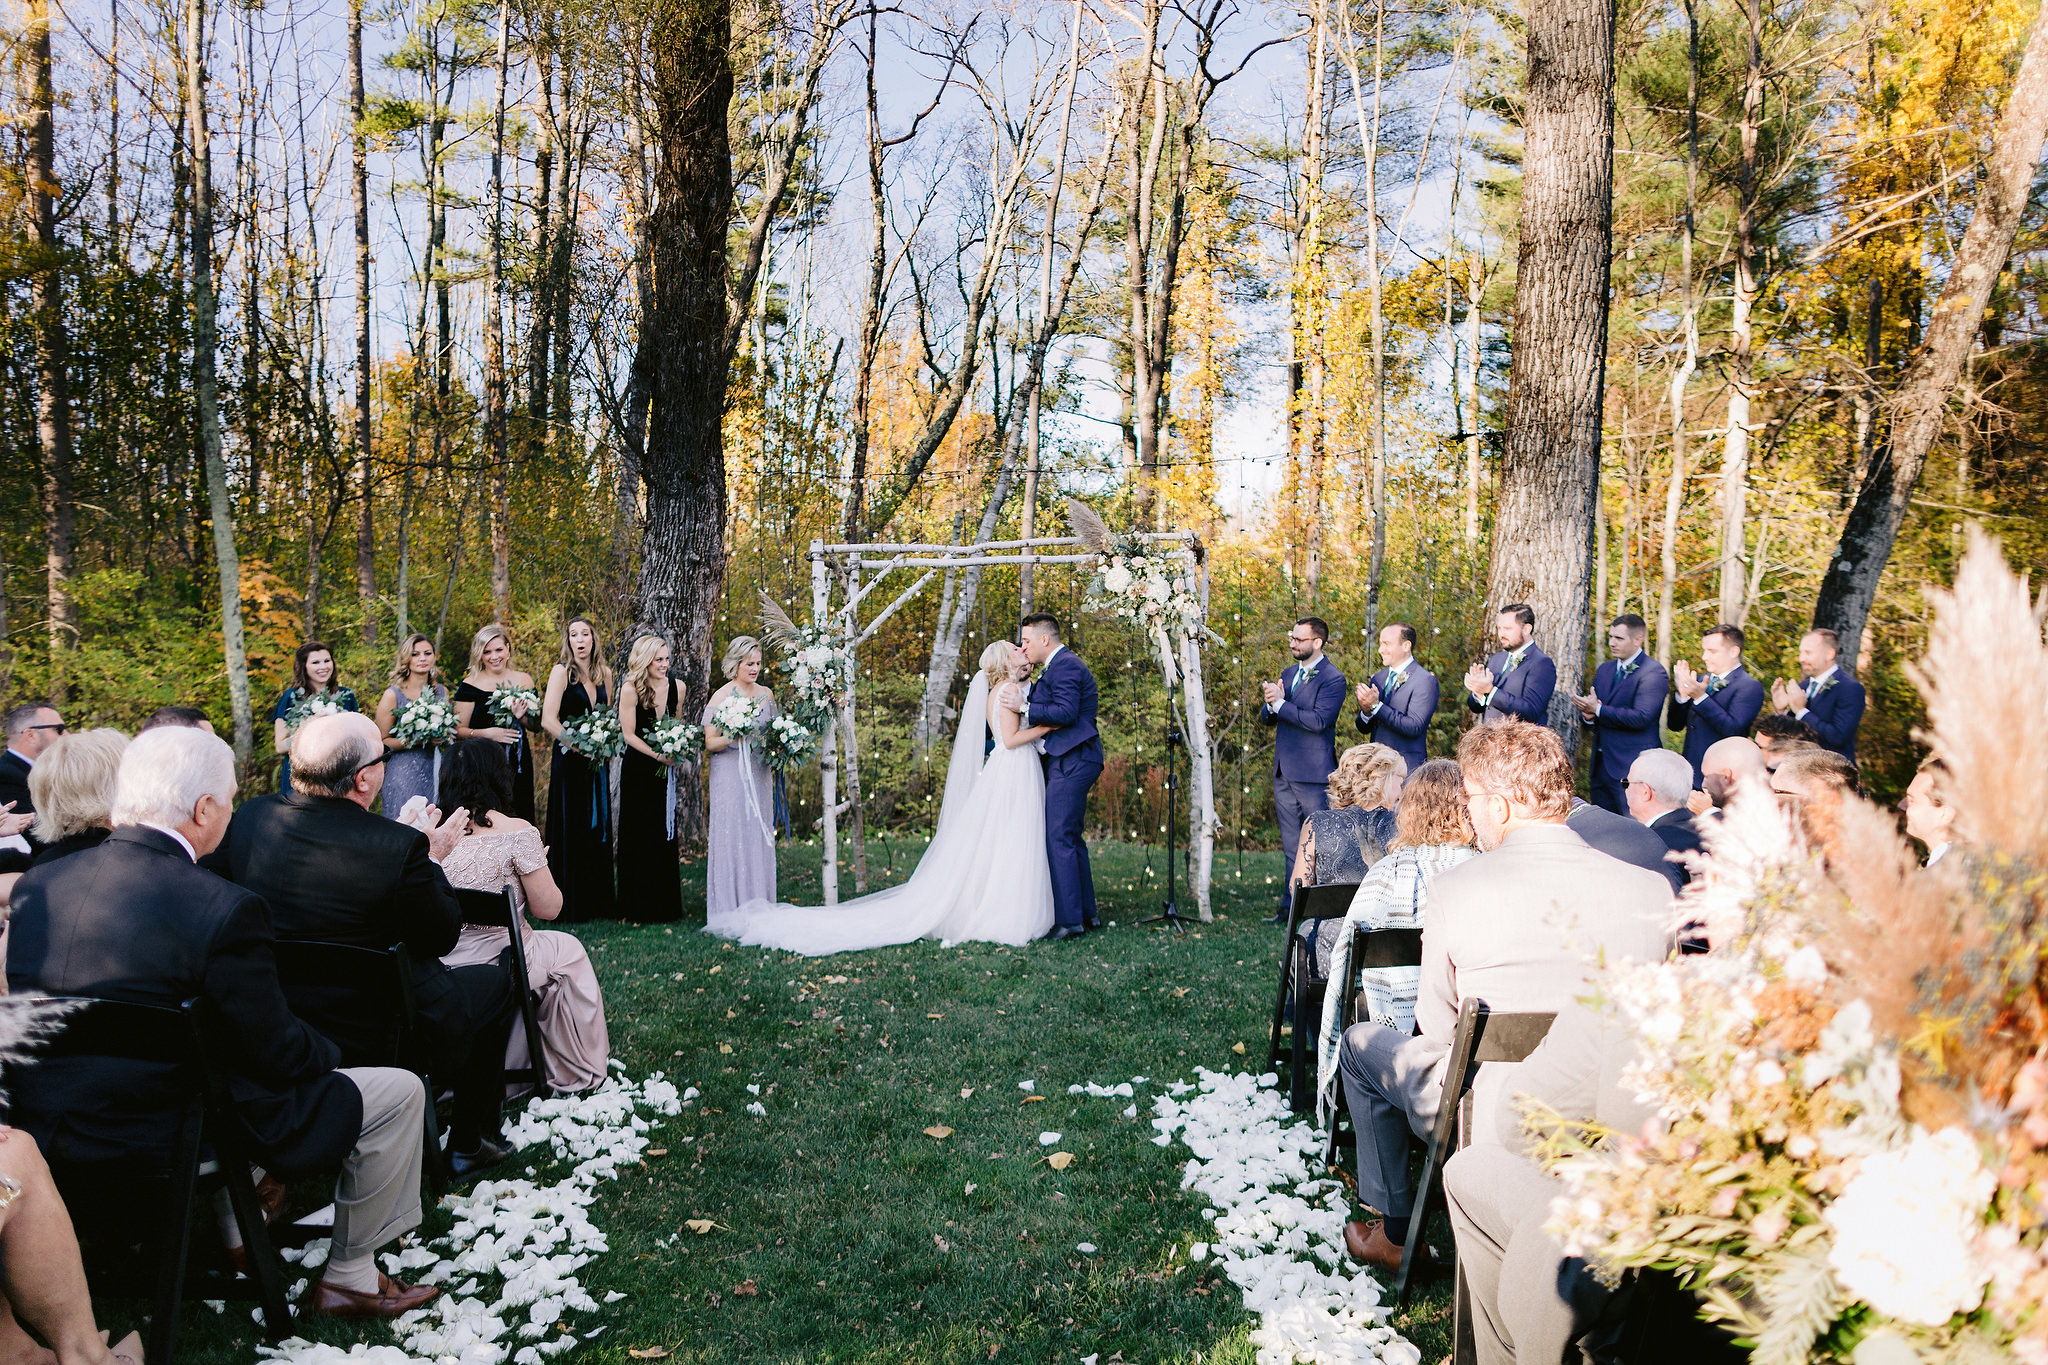 The bride and groom are kissing each other under their wedding arch as the ceremony ended while the guests are watching.